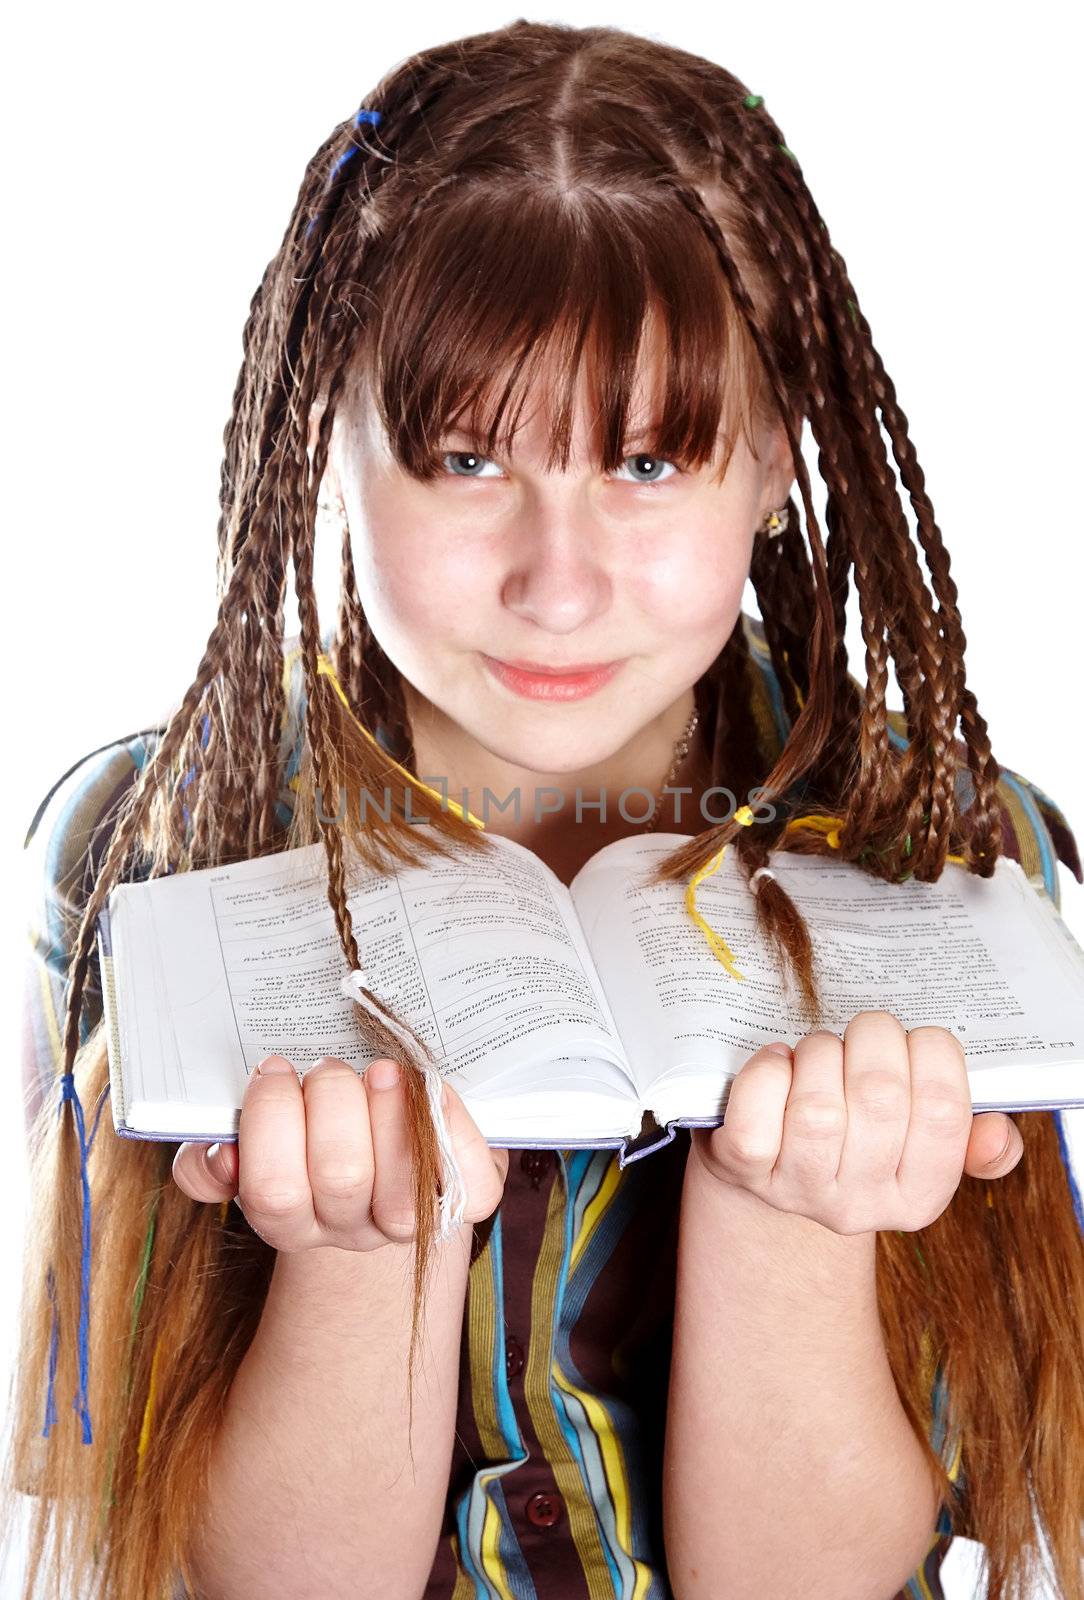 The teenage girl with plaits and the book on a white background